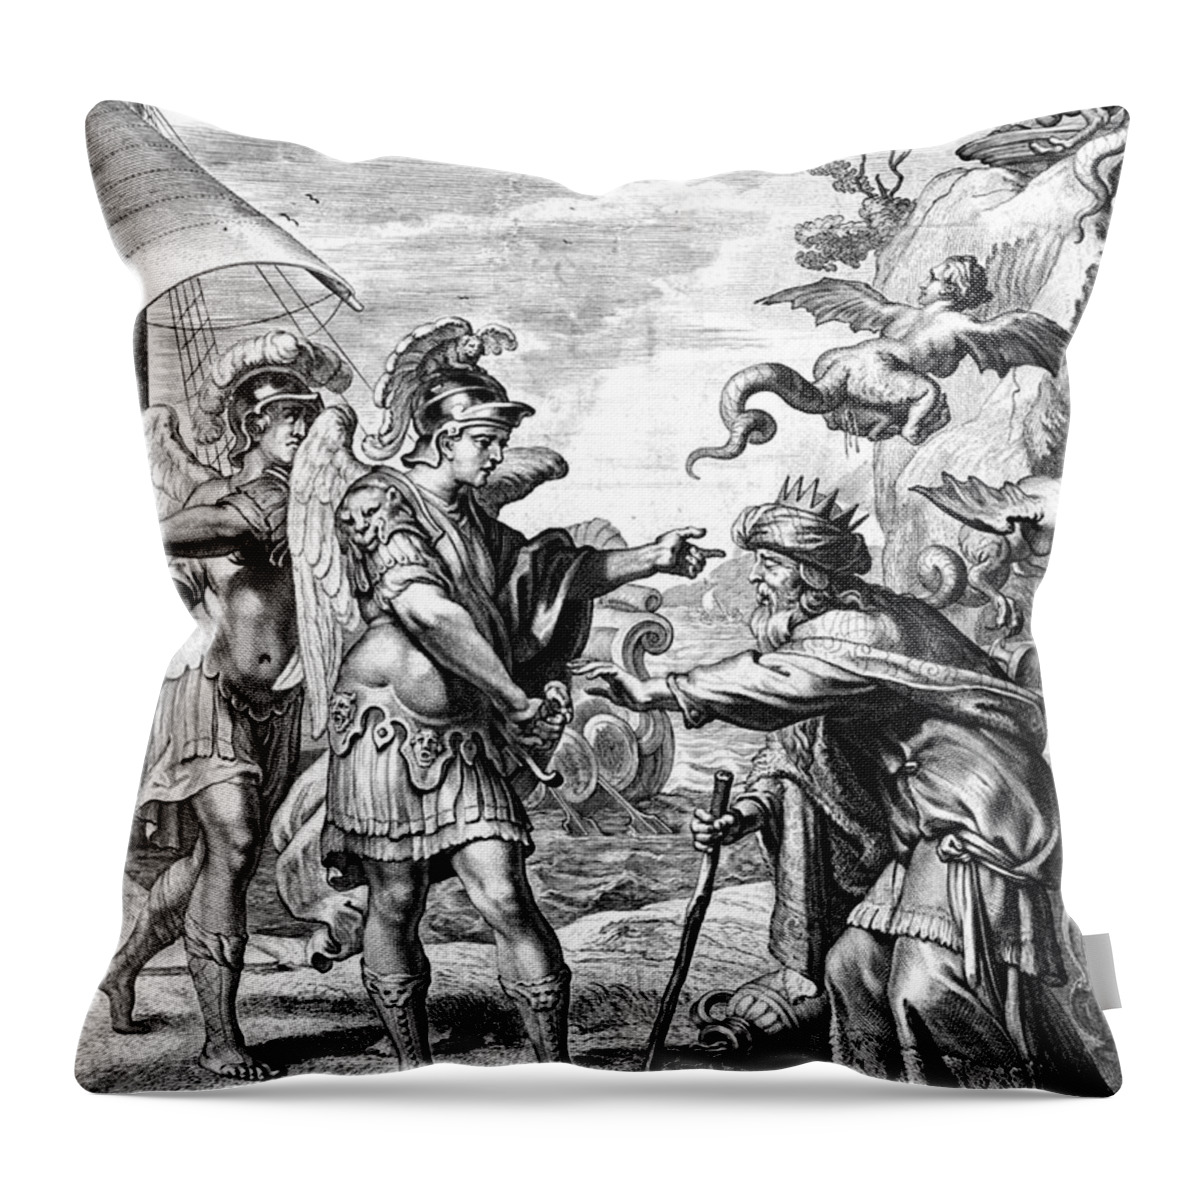 History Throw Pillow featuring the photograph Argonauts Deliver Phineas From Harpies by Photo Researchers